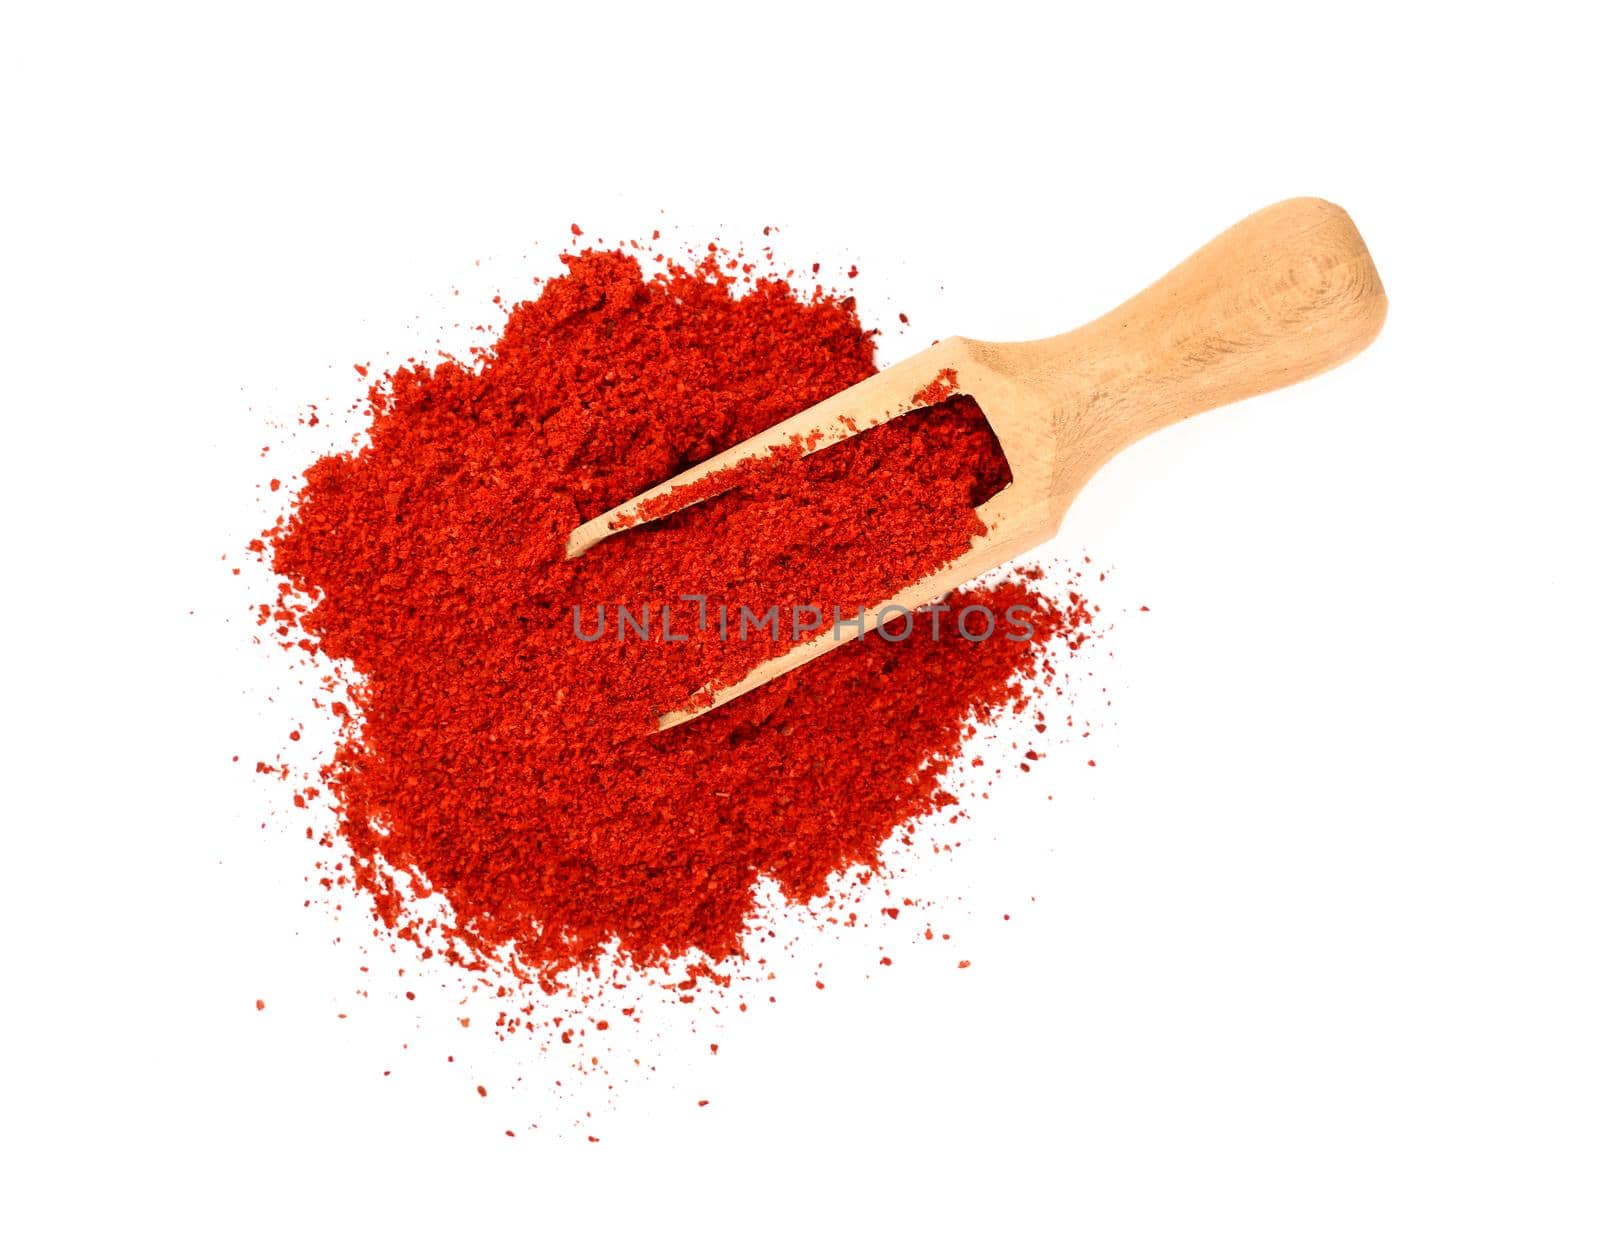 Close up one wooden scoop full of red chili pepper, paprika or sundried tomato powder spilled and spread around isolated on white background, elevated top view, directly above